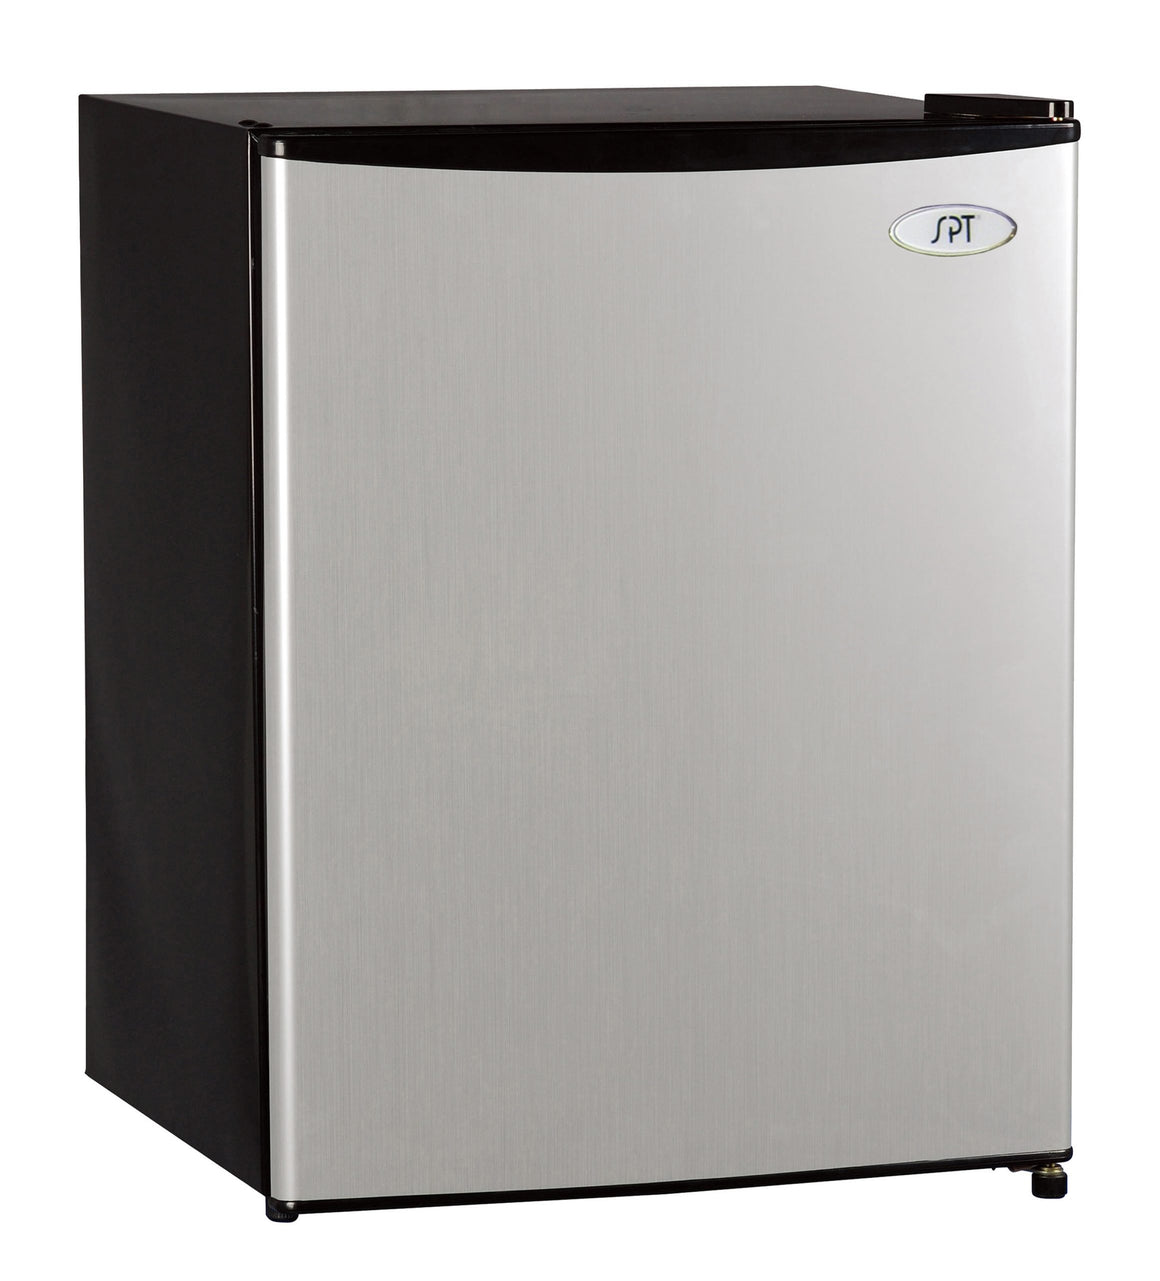 SPT - RF-245SS: 2.4 cu. ft. Stainless Refrigerator with Energy Star